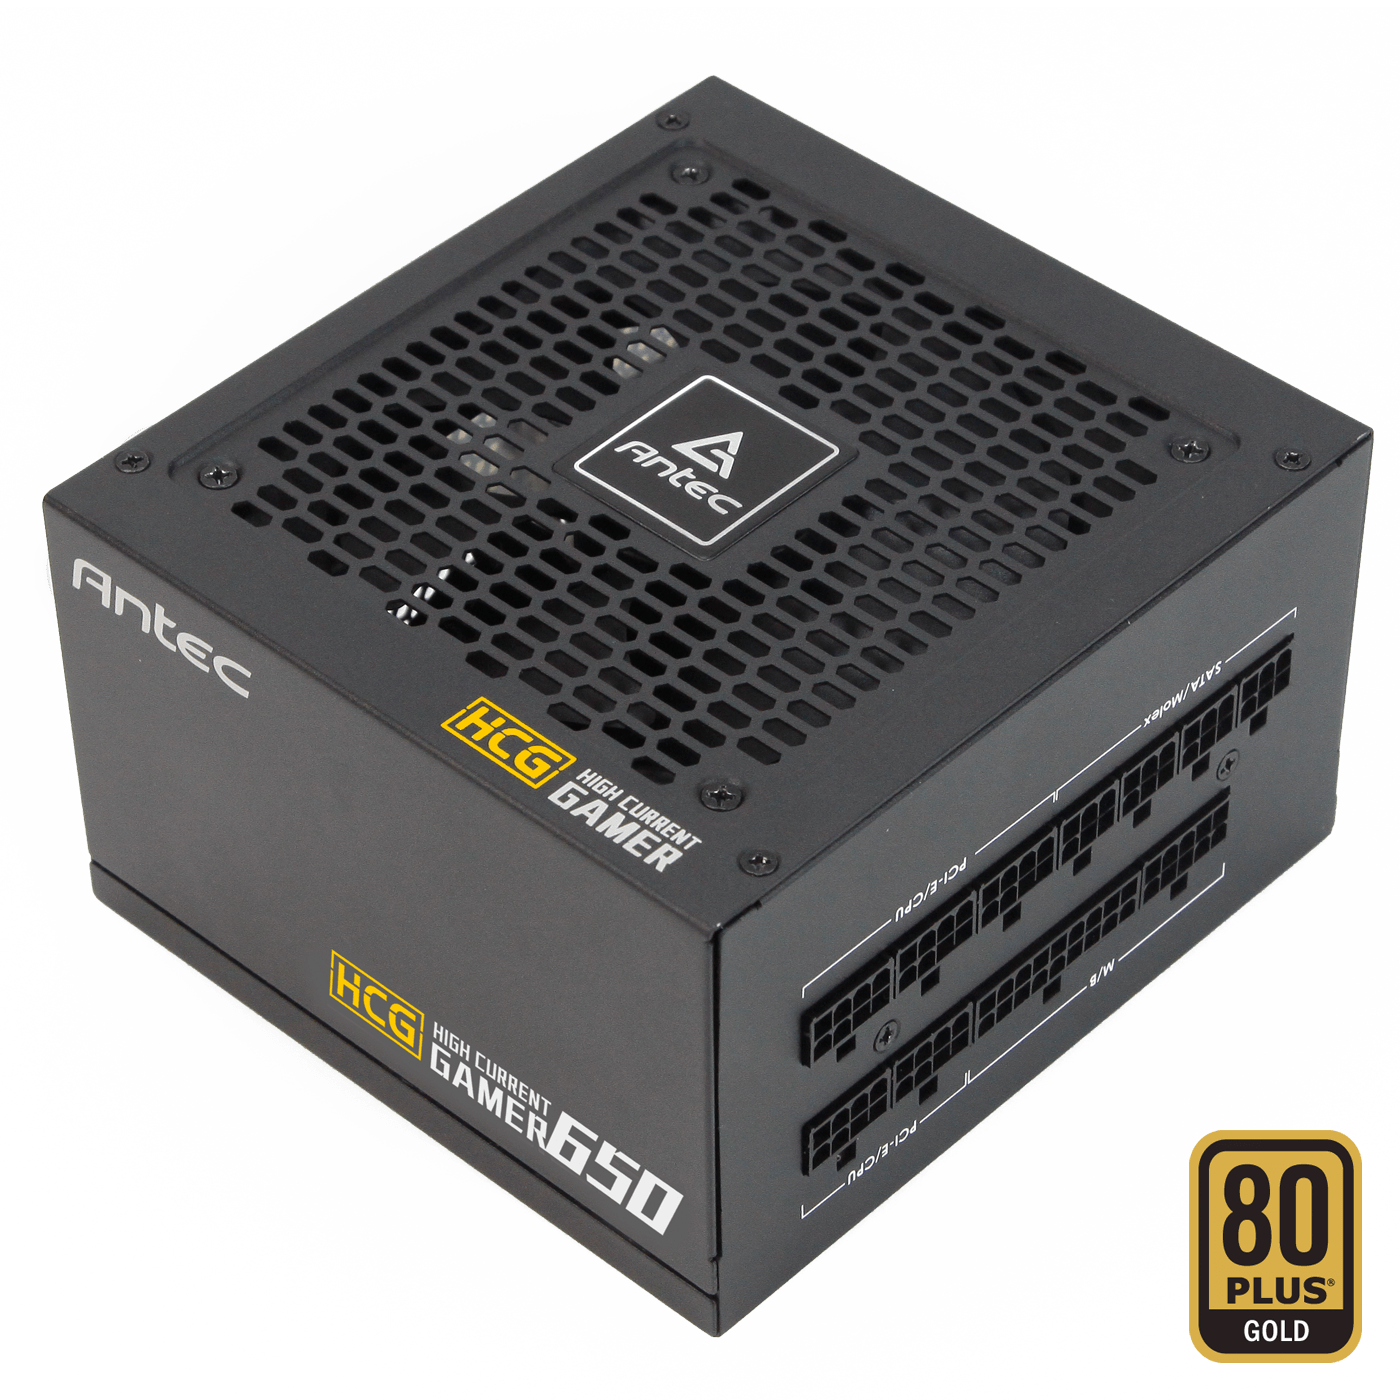 meaning Cook a meal Interpretation The HCG GOLD Best 650W psu is the 80 PLUS Gold Fully Modular PSU with 120mm  FDB Fan/LLC + DC to DC Design/Full Japanese Caps/10-Year Warranty - Antec